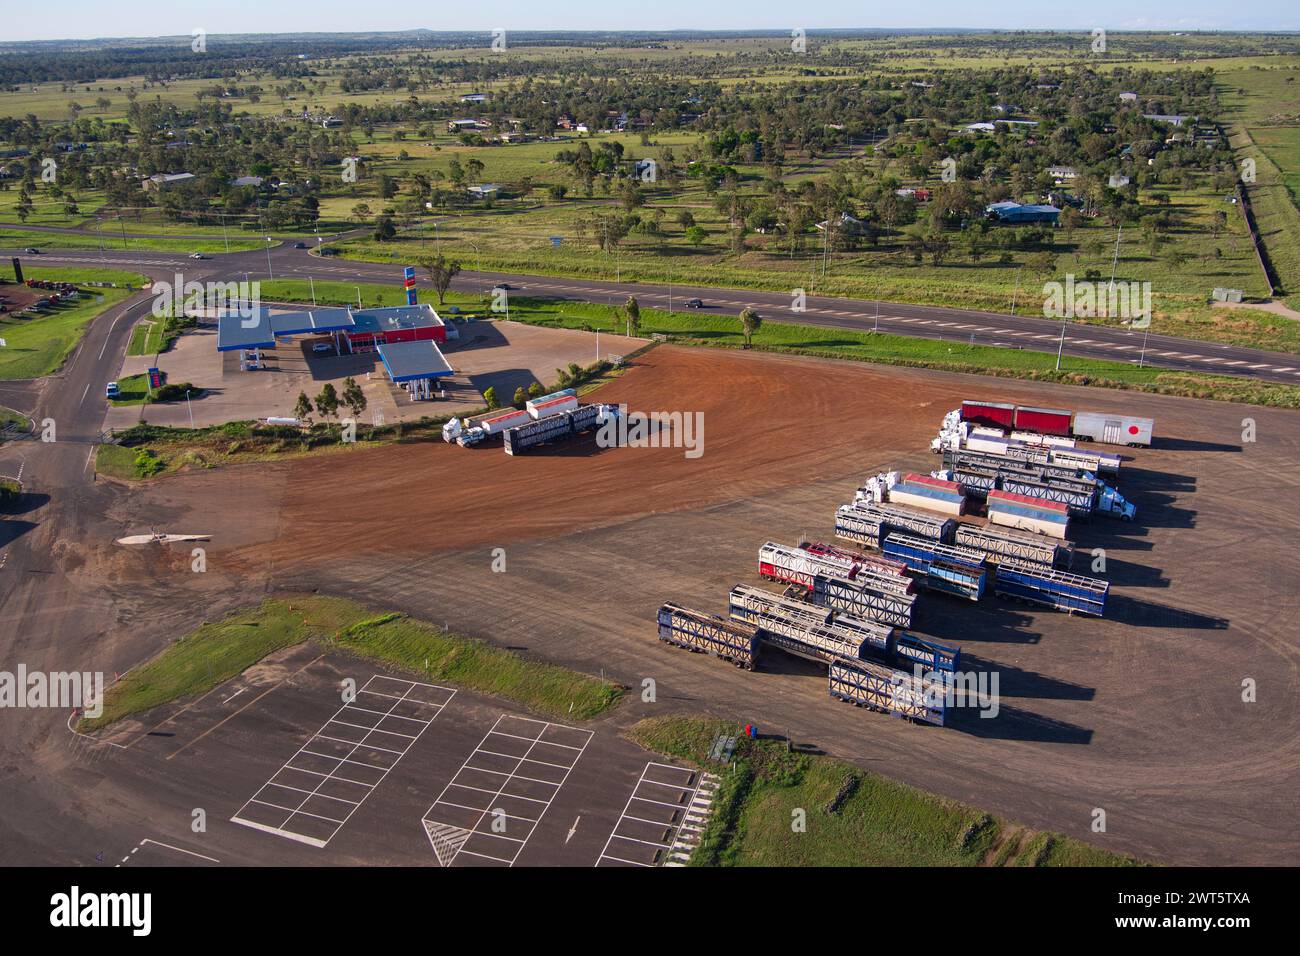 Aerial of roadtrains parked the Pie Face Service Station at the saleyards Roma Queensland Australia Stock Photo